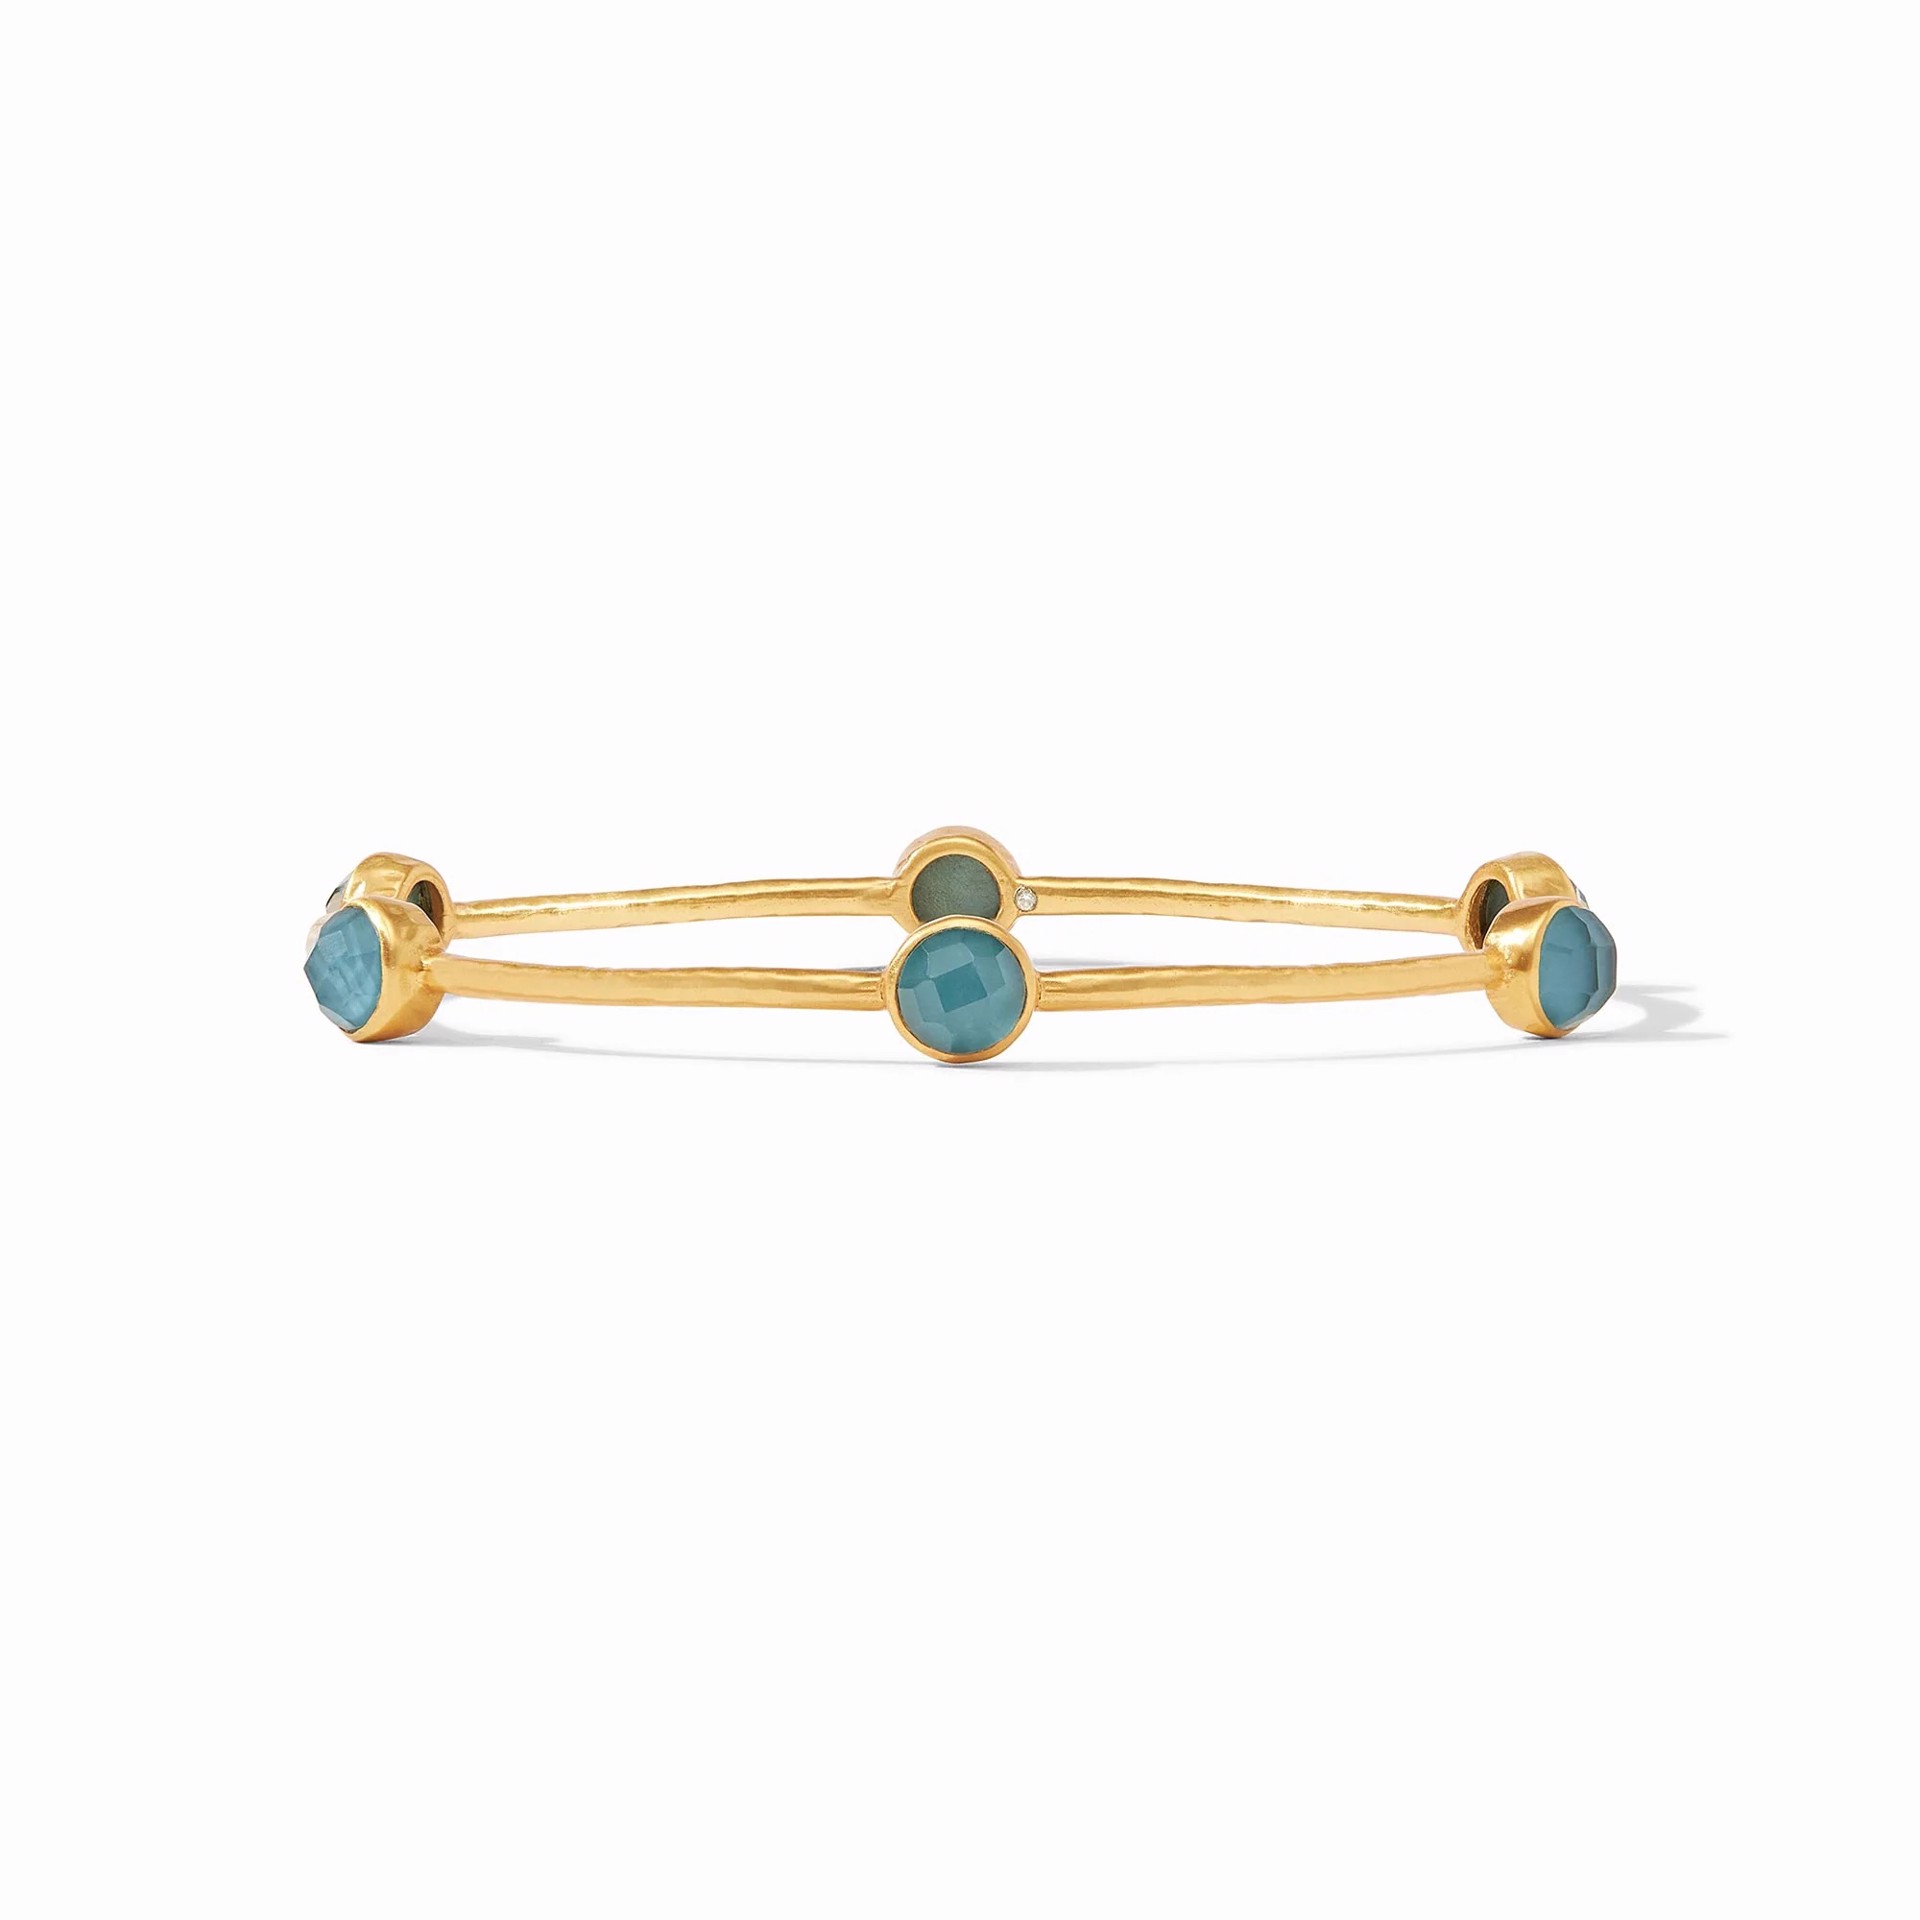 Milano Luxe Bangle - Peacock Blue / Medium by Julie Vos